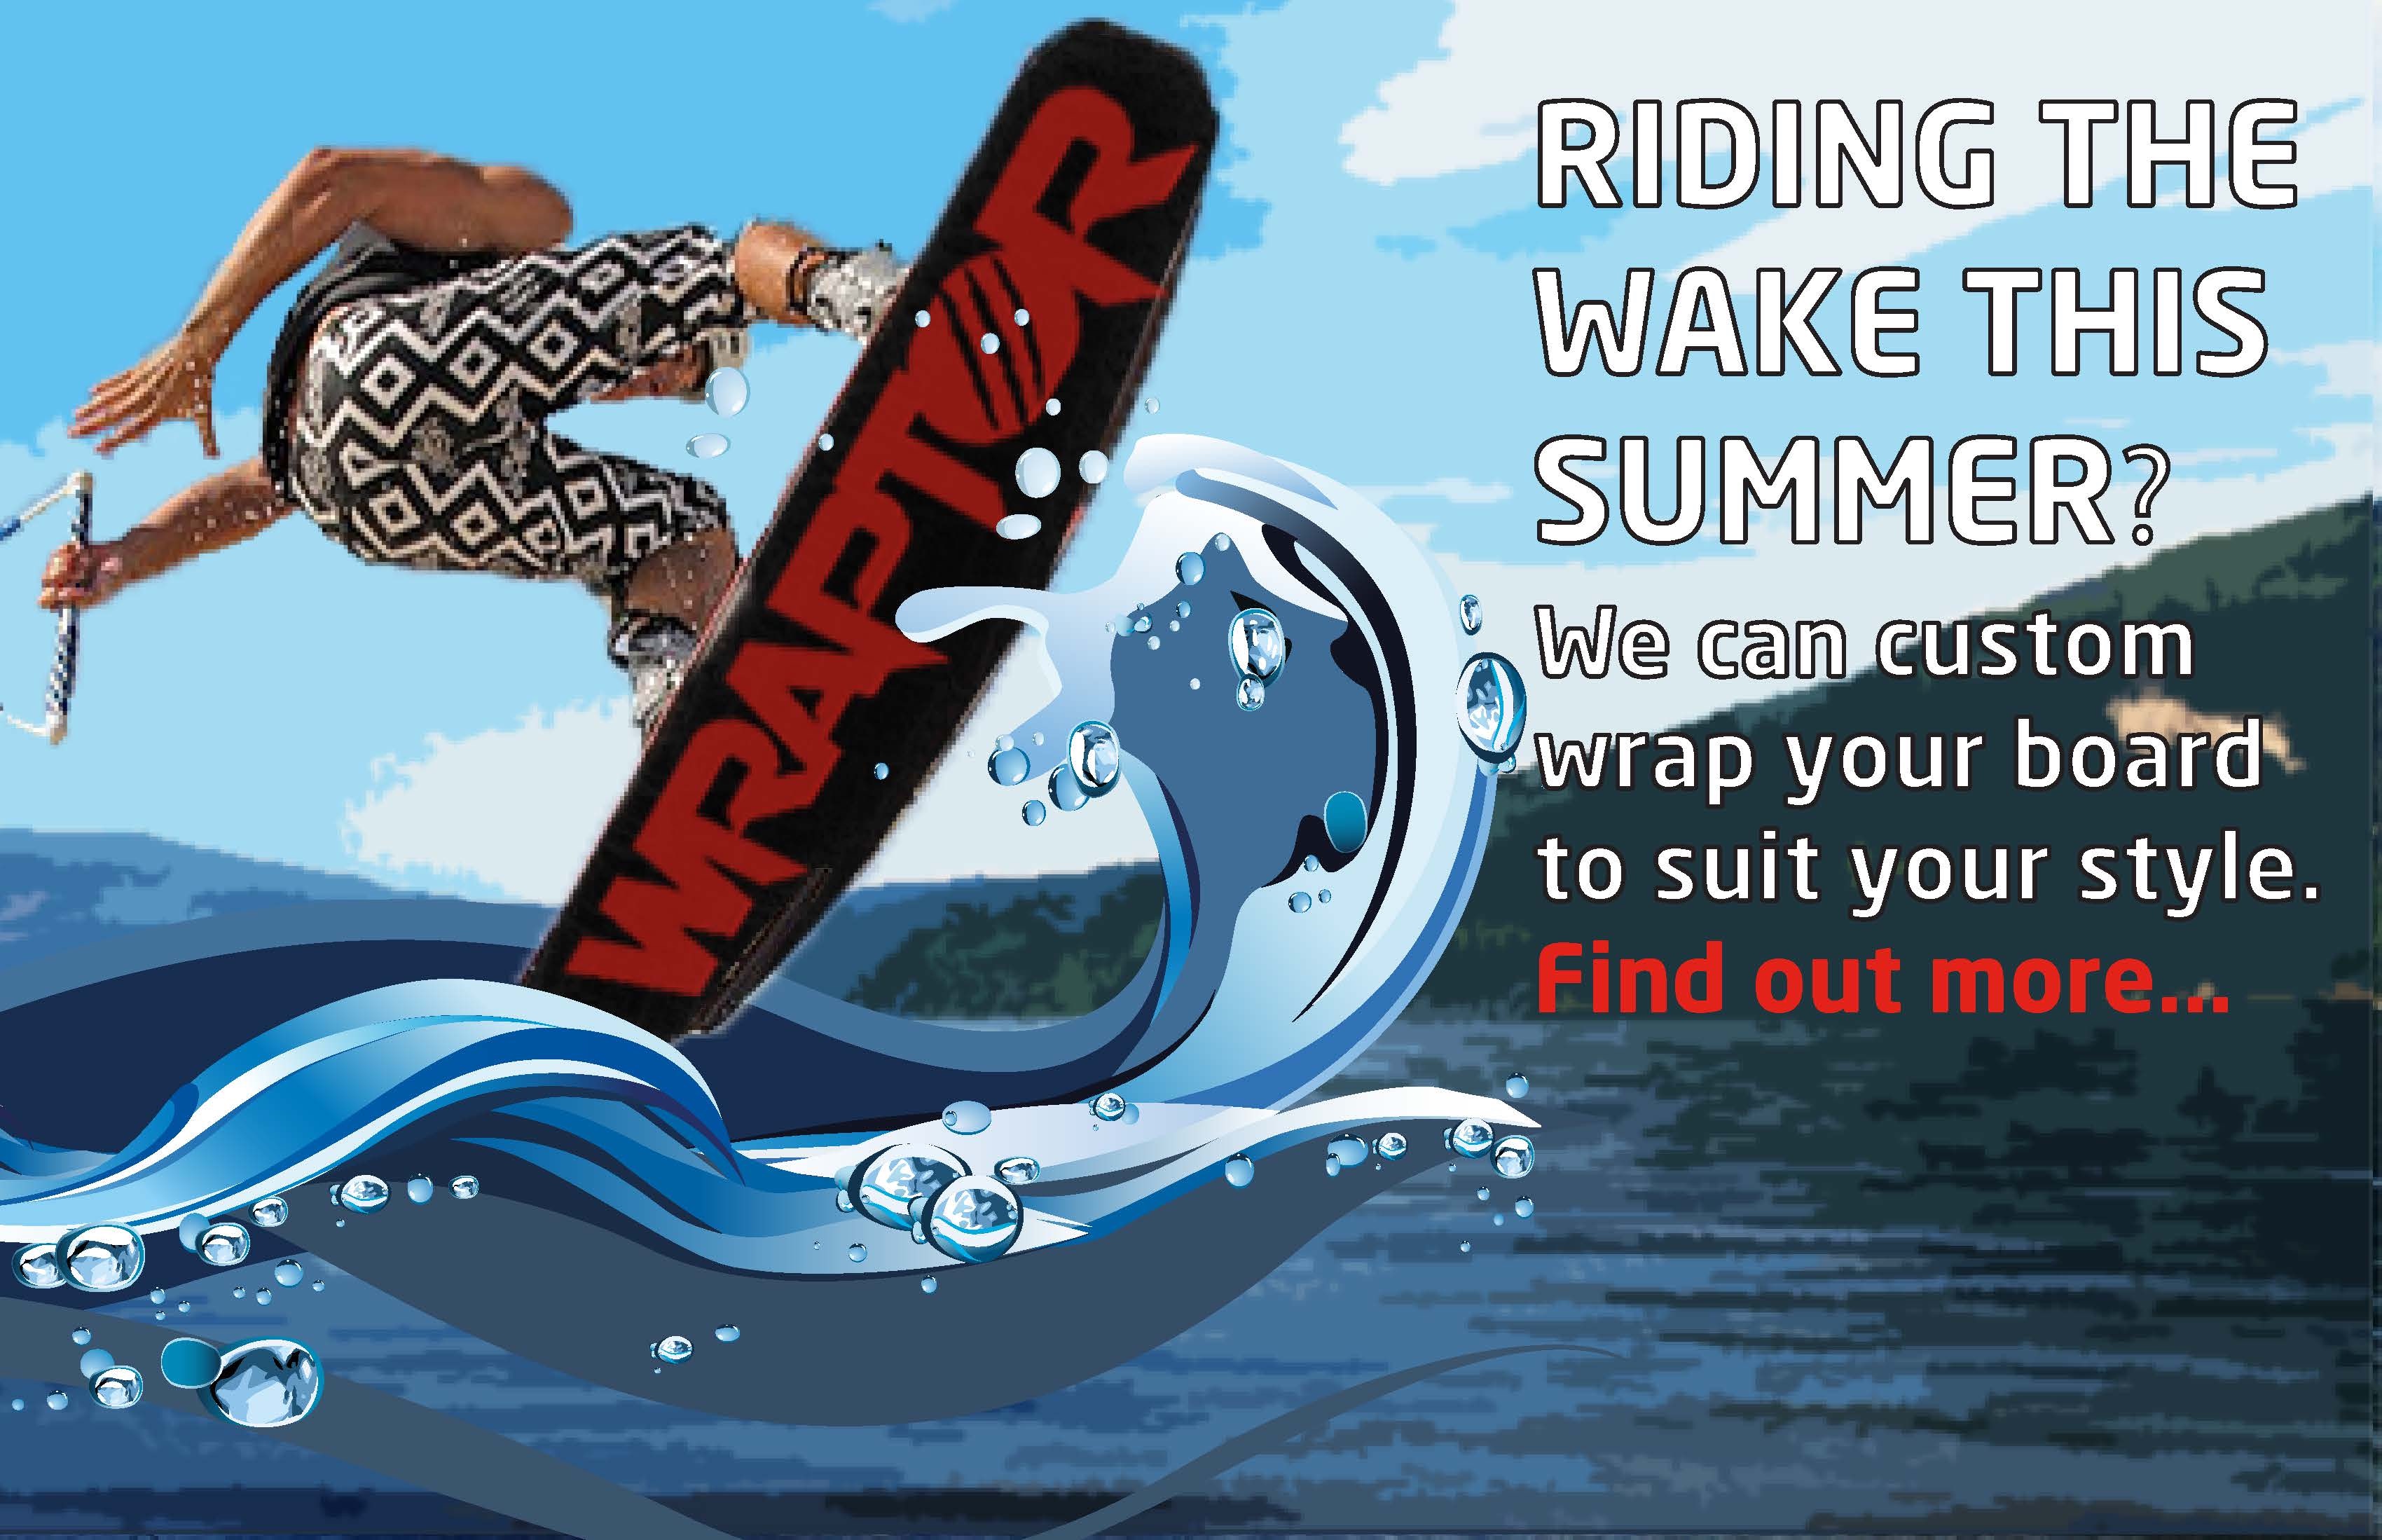 Custom wraps for boards including snowboards, longboards, wakeboards